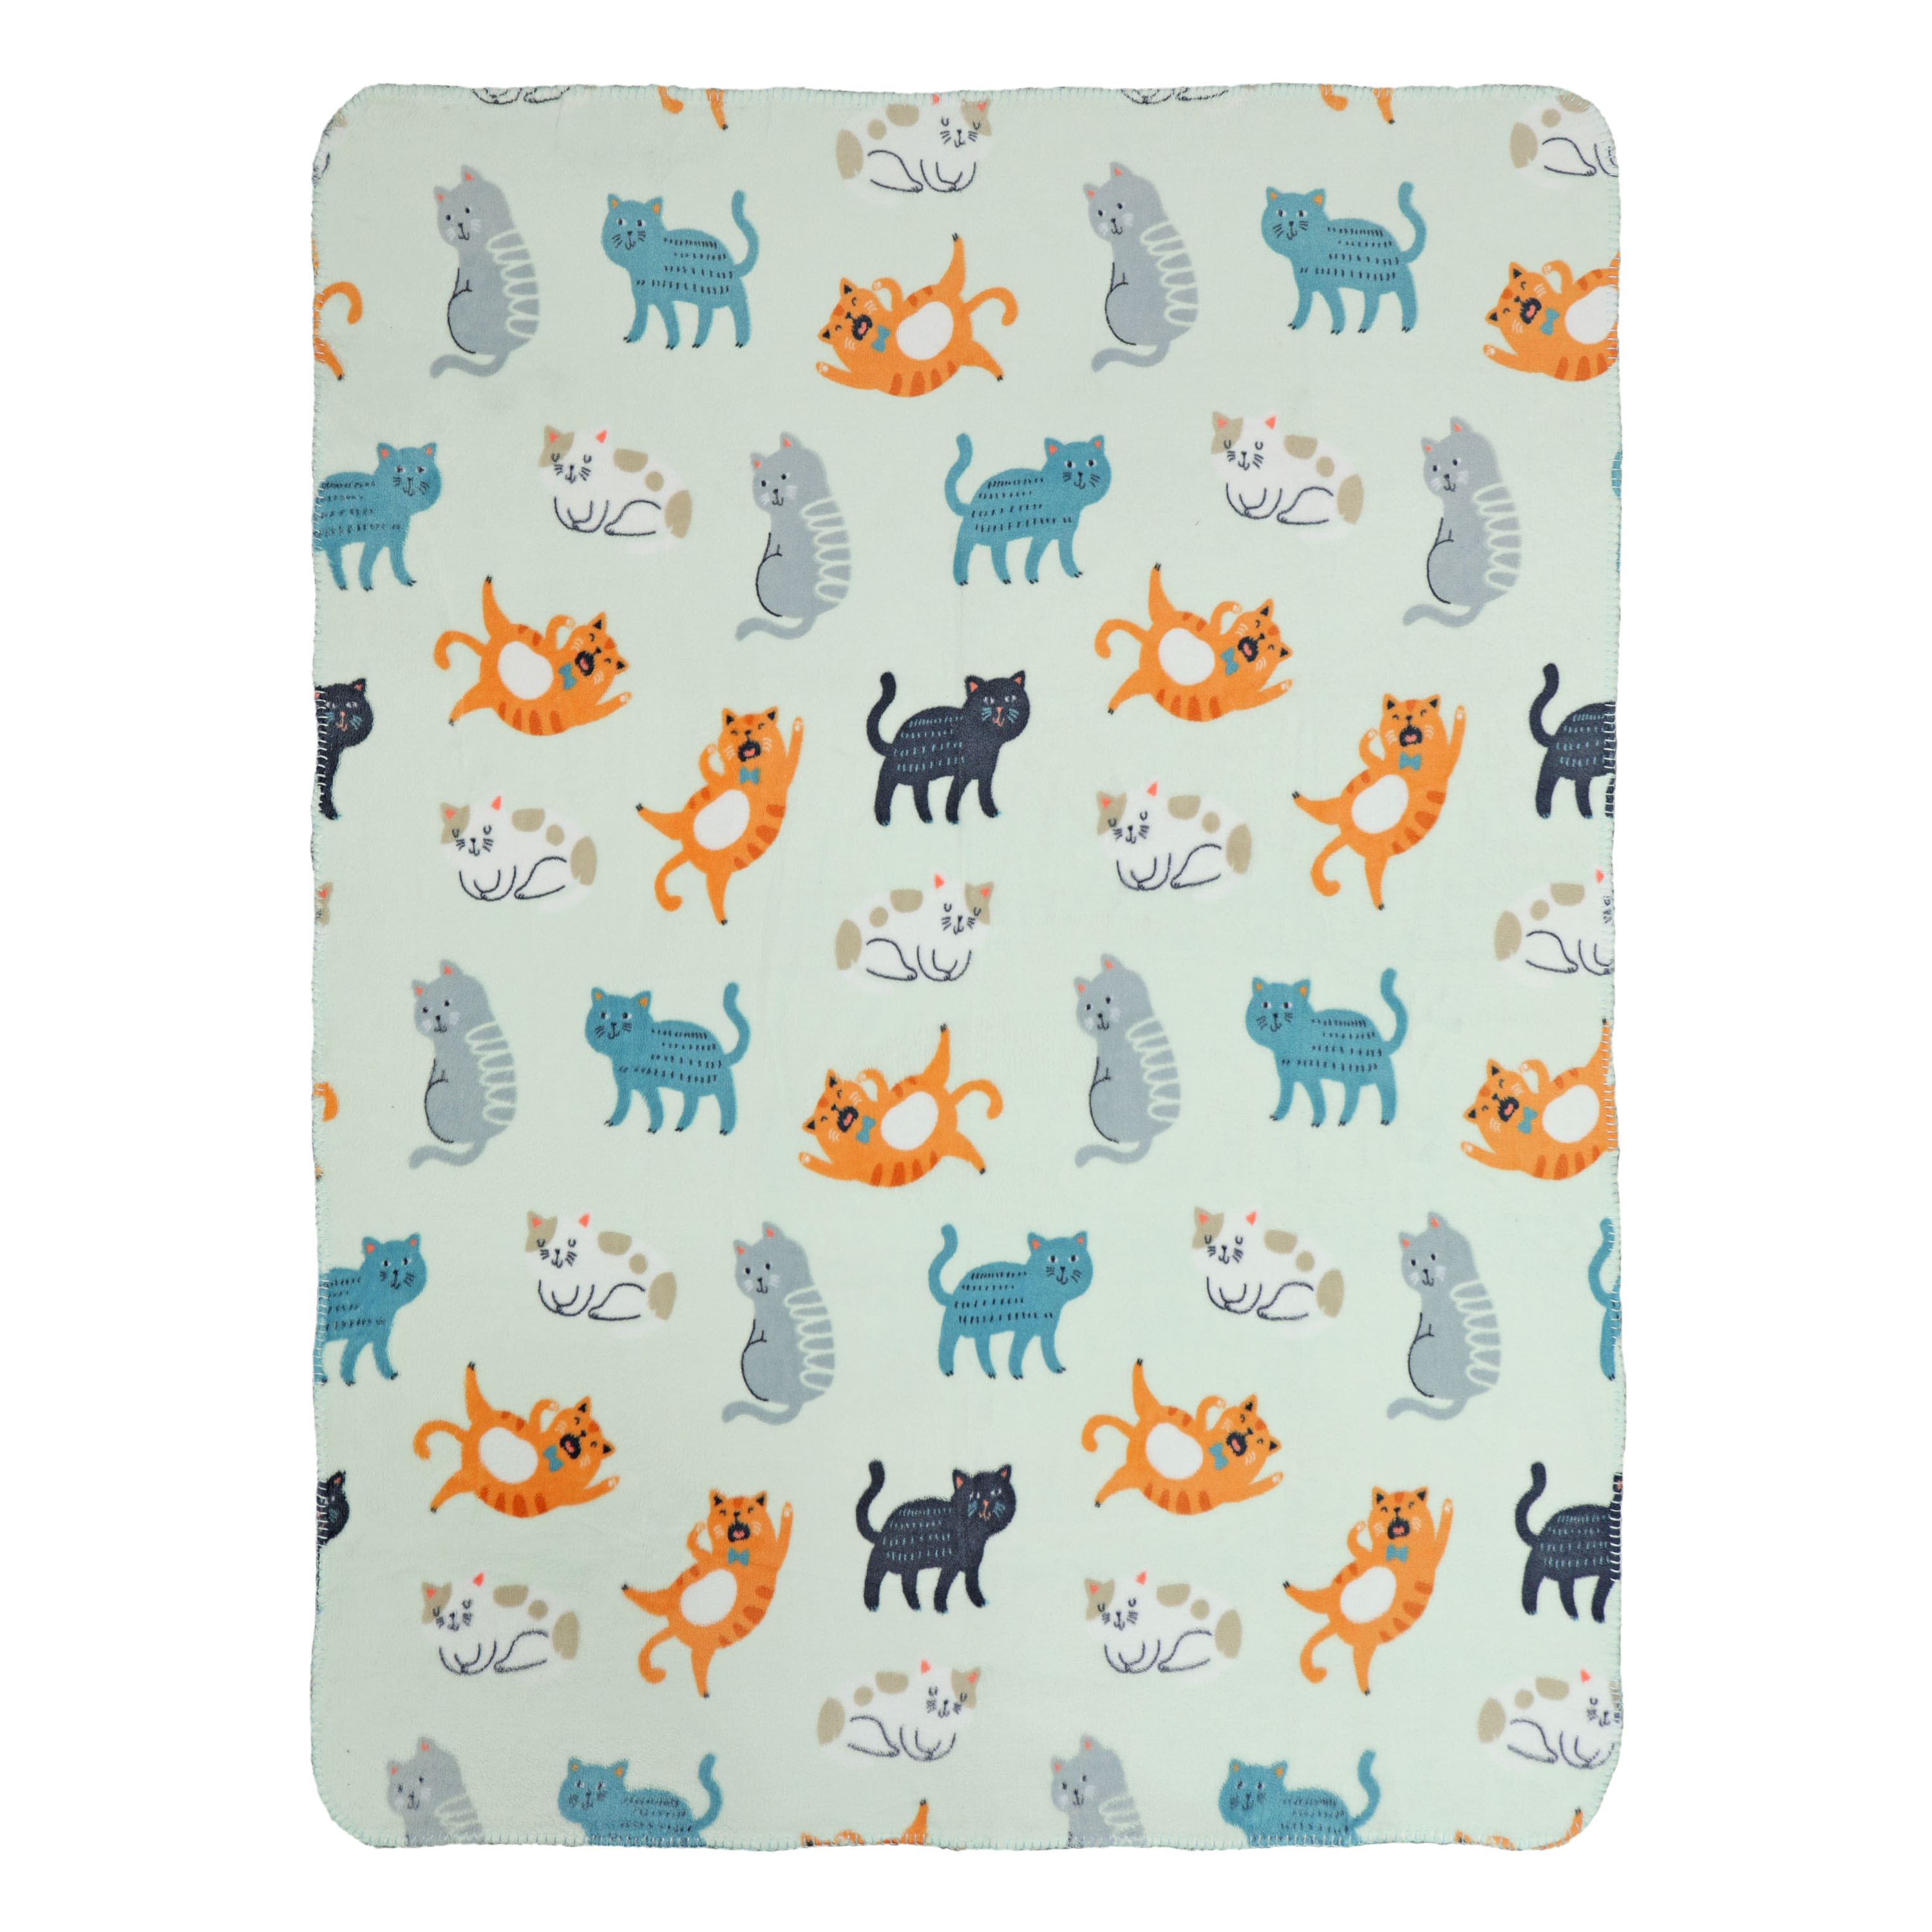 Mainstays Fleece Plush Throw Blanket, 50" x 60", Cats, 2-Pack - image 3 of 11